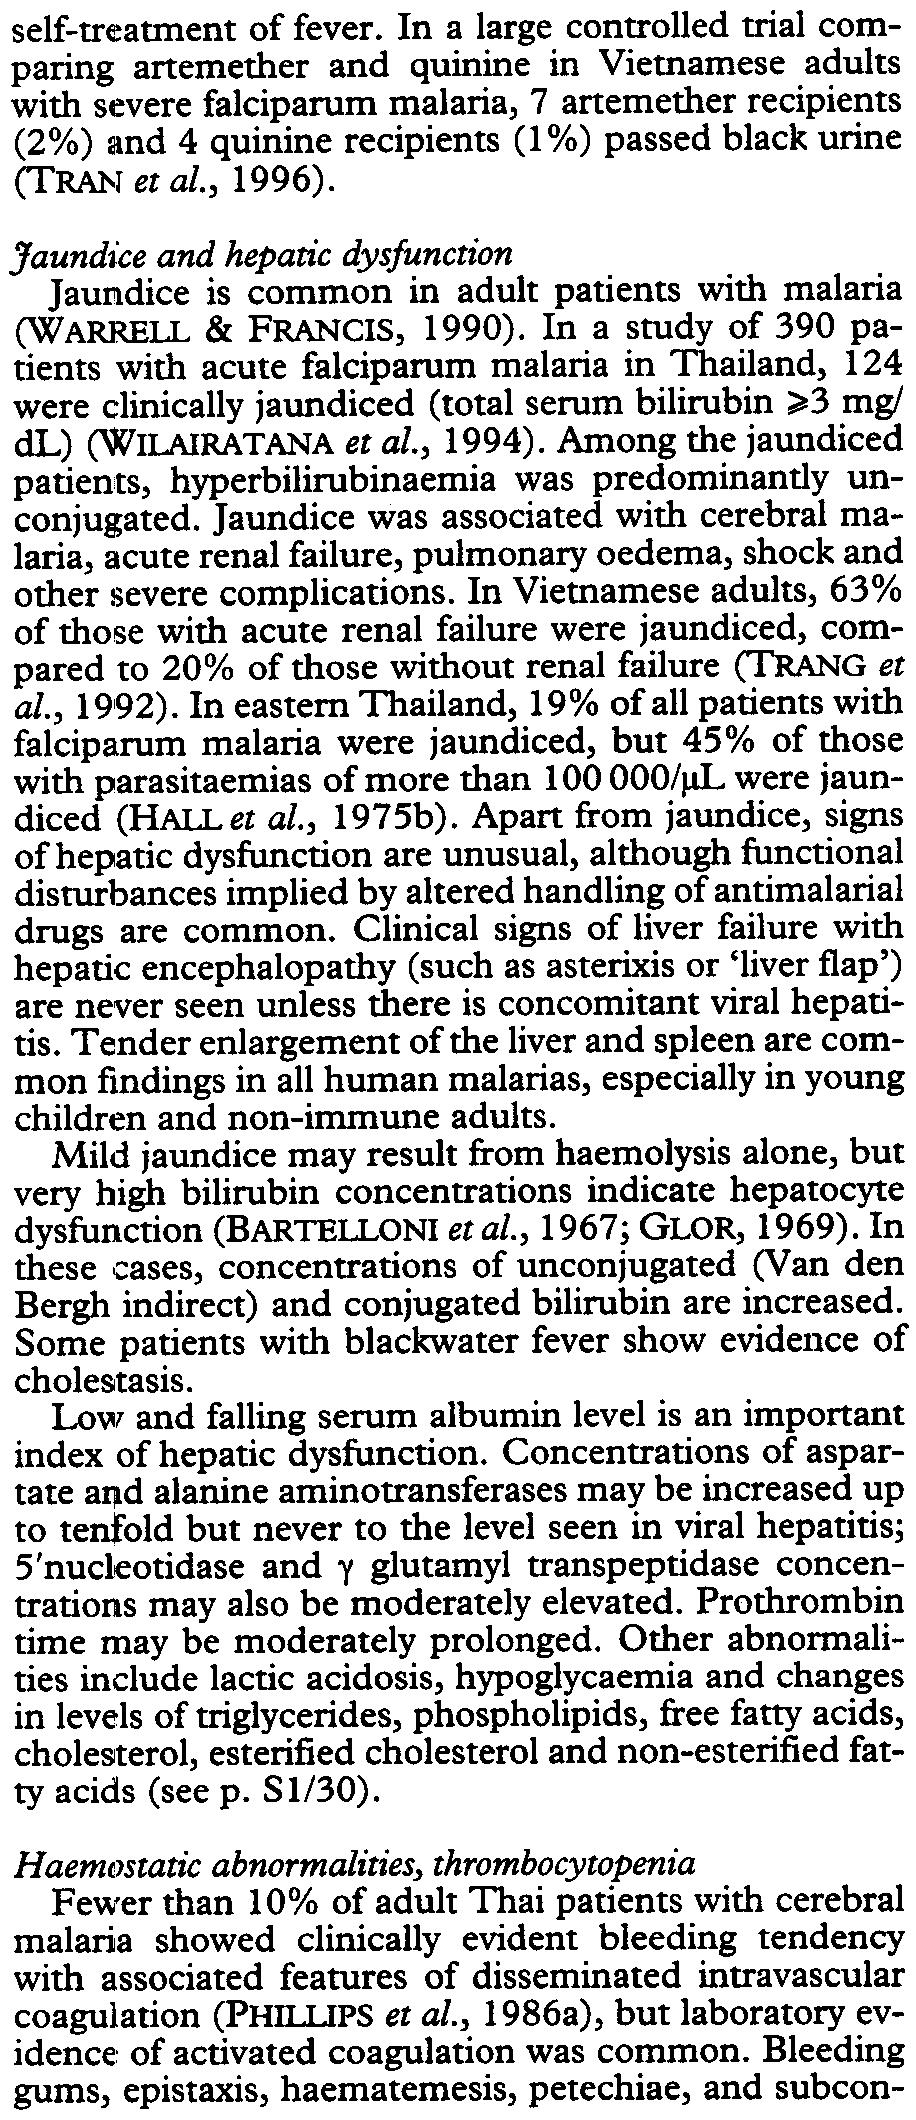 TRANSAcnONS OFTHE ROYAL SOCIETY OFTROPICAL MEDICINE AND HYGIENE (2000) 94, SUPPLEMENT 1 SIllS self-treatment of fever.